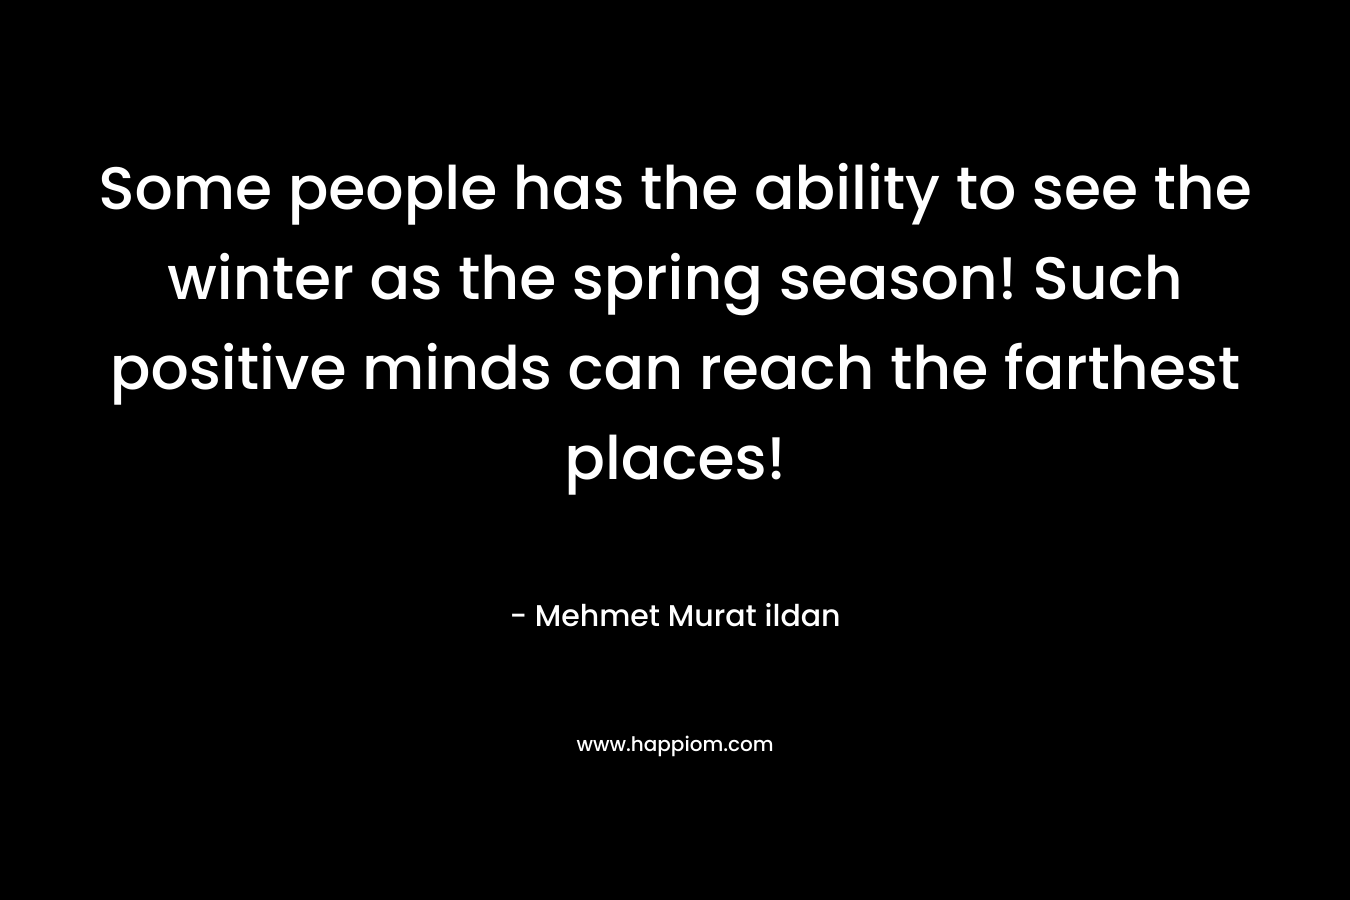 Some people has the ability to see the winter as the spring season! Such positive minds can reach the farthest places! – Mehmet Murat ildan